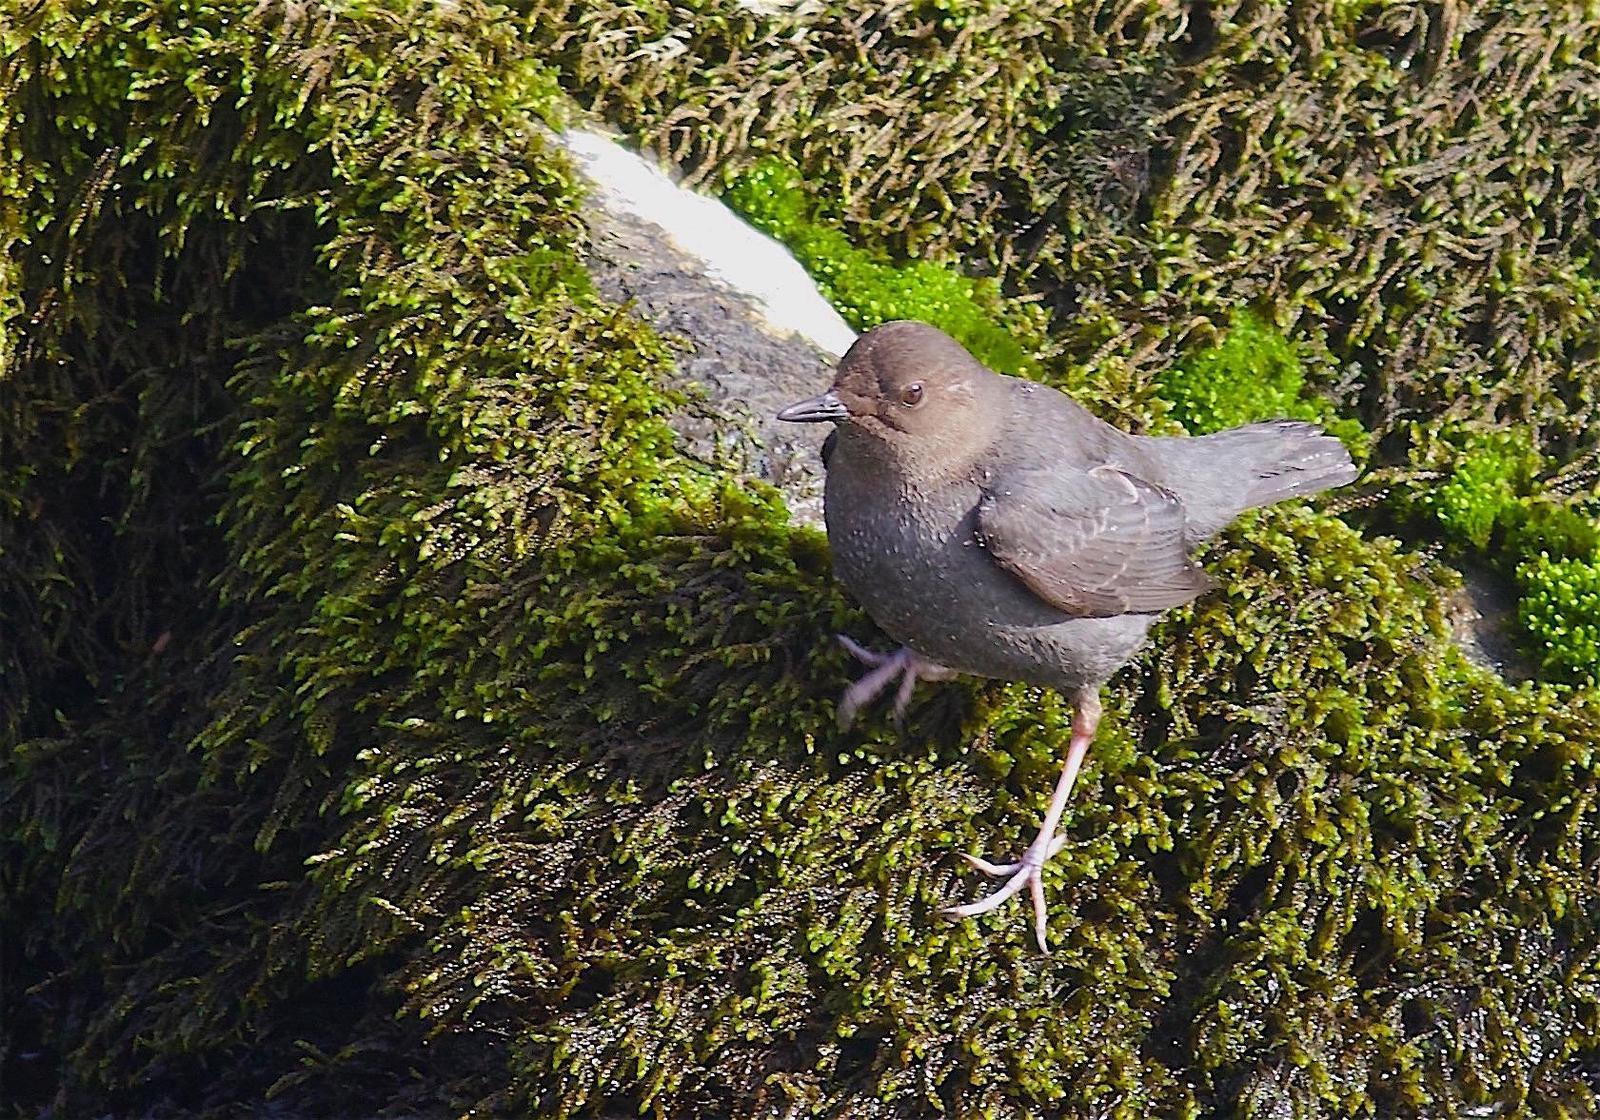 American Dipper Photo by Kathryn Keith